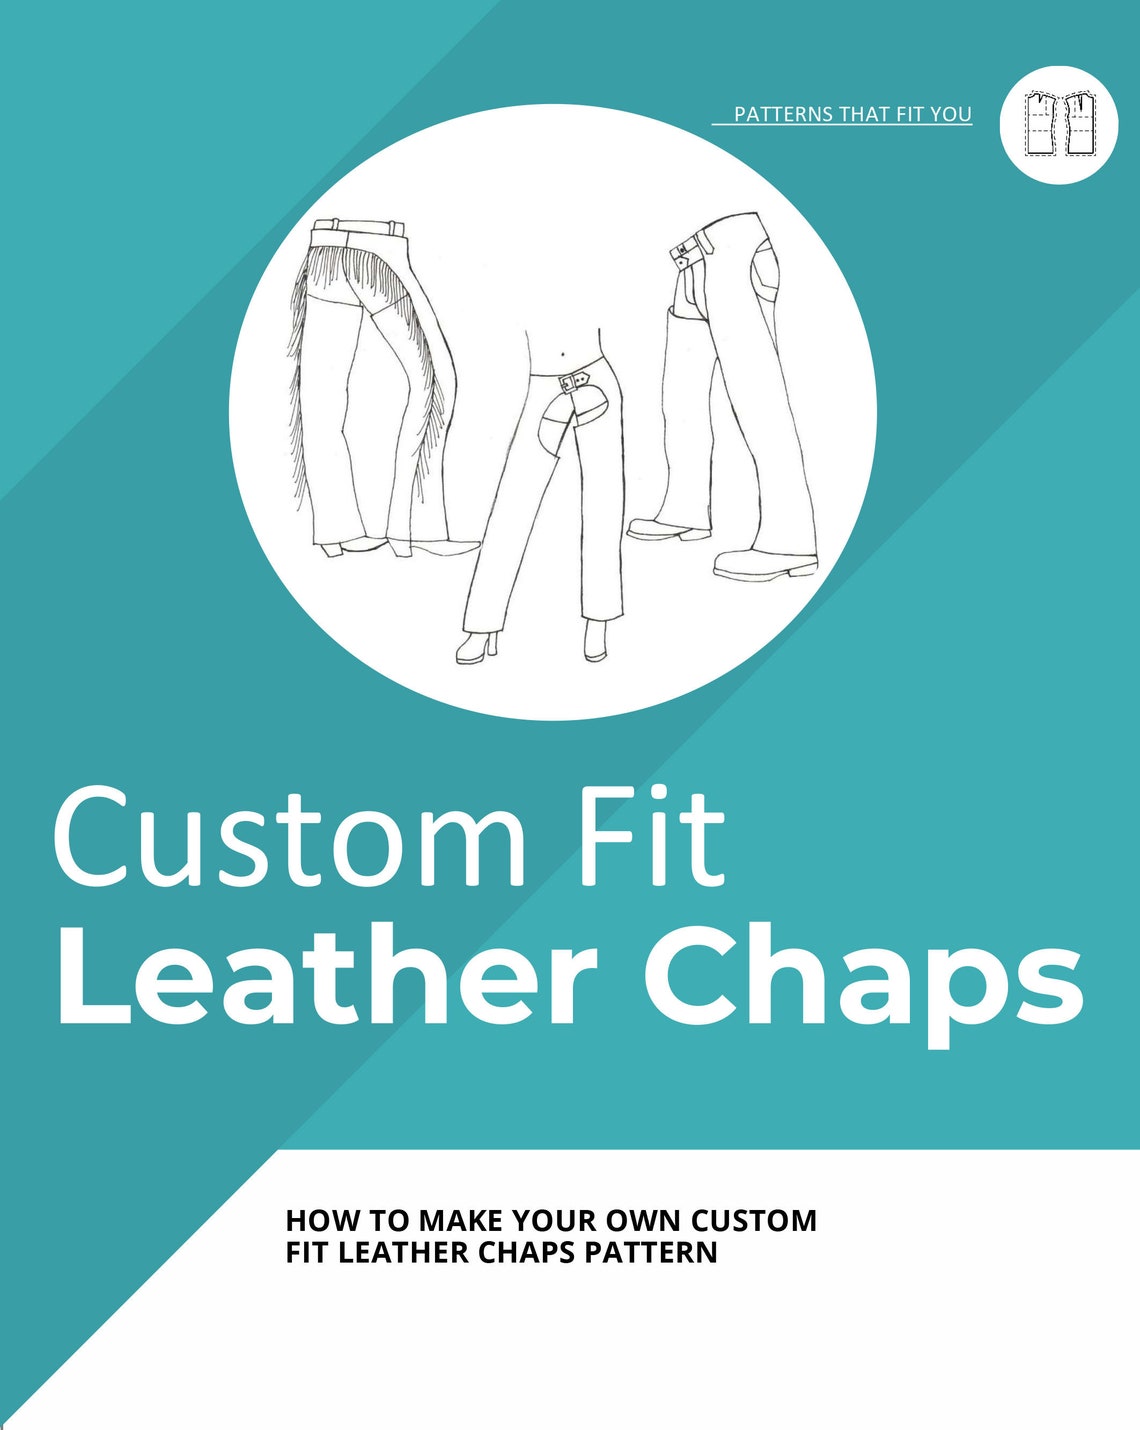 Custom Fit Leather Chaps Pattern Instructions | Etsy